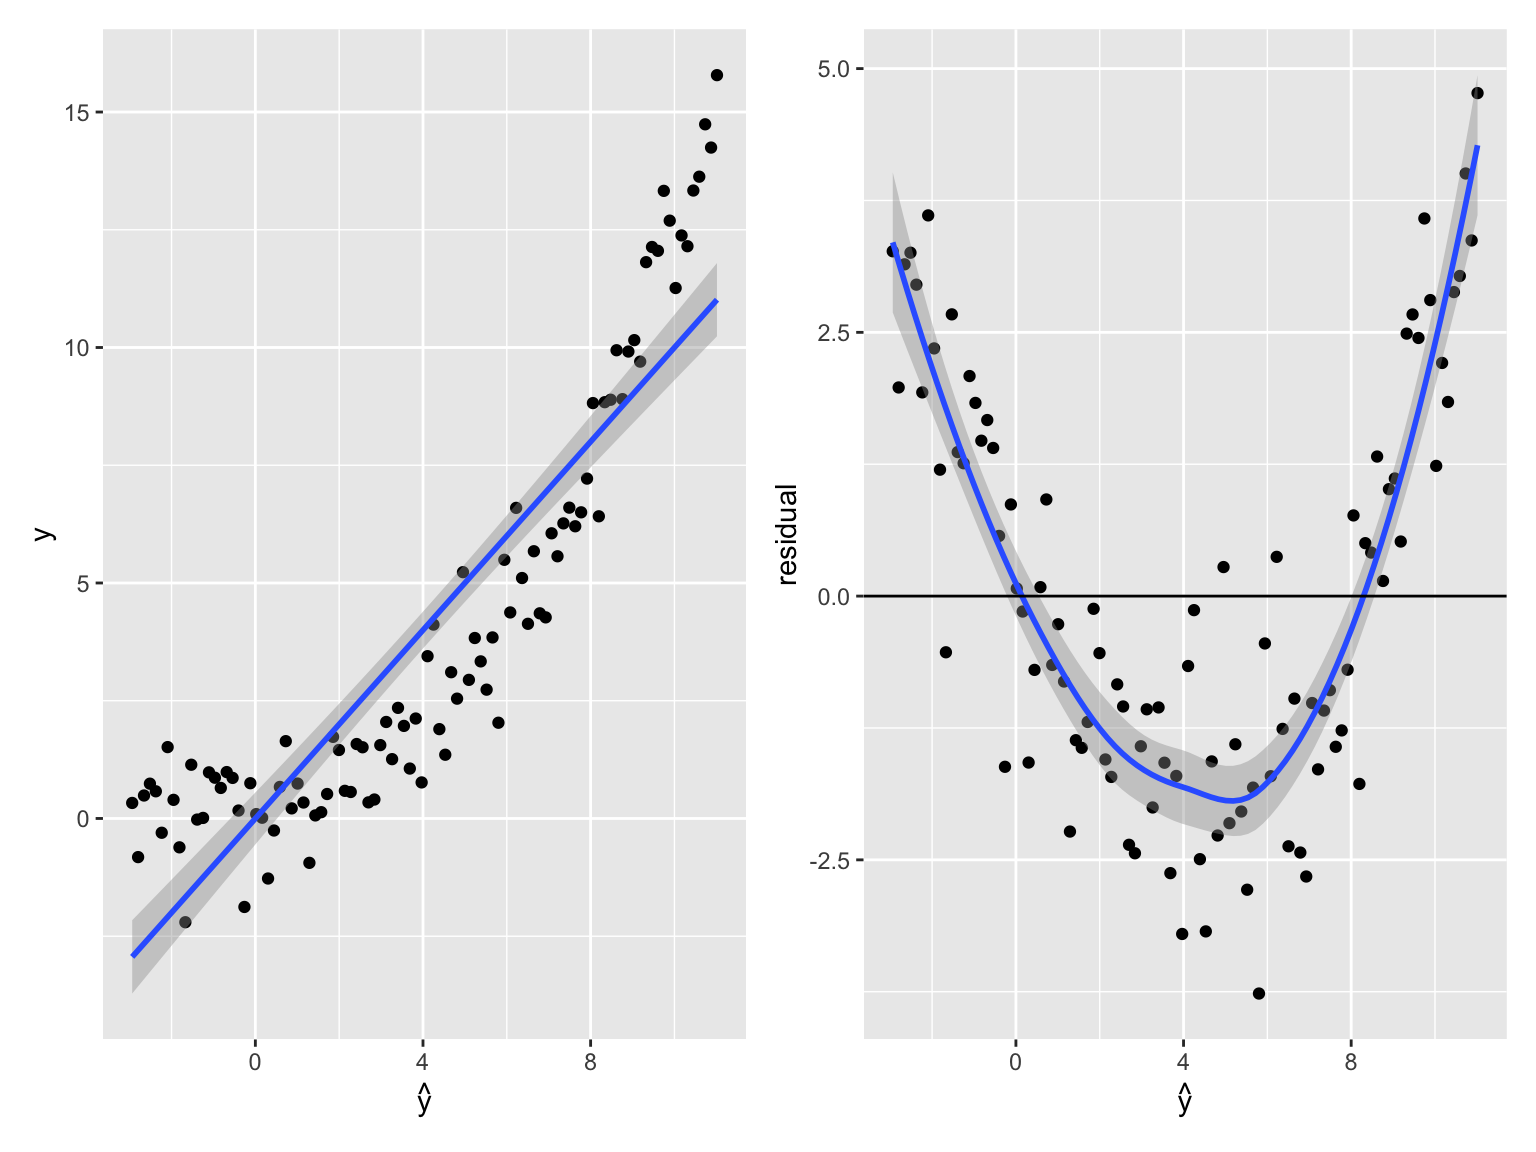 Detecting non-linearity. (Left). Observed value  against predictions for linear fit on data generated as y = x^3 + noise. The fitted line is shown in blue. (Right) Residual versus predicted value of the same data. A smooth fit to the residual is shown in blue. The smooth fit highlights that the errors depend on the predicted expected values, indicative of non-linearity.